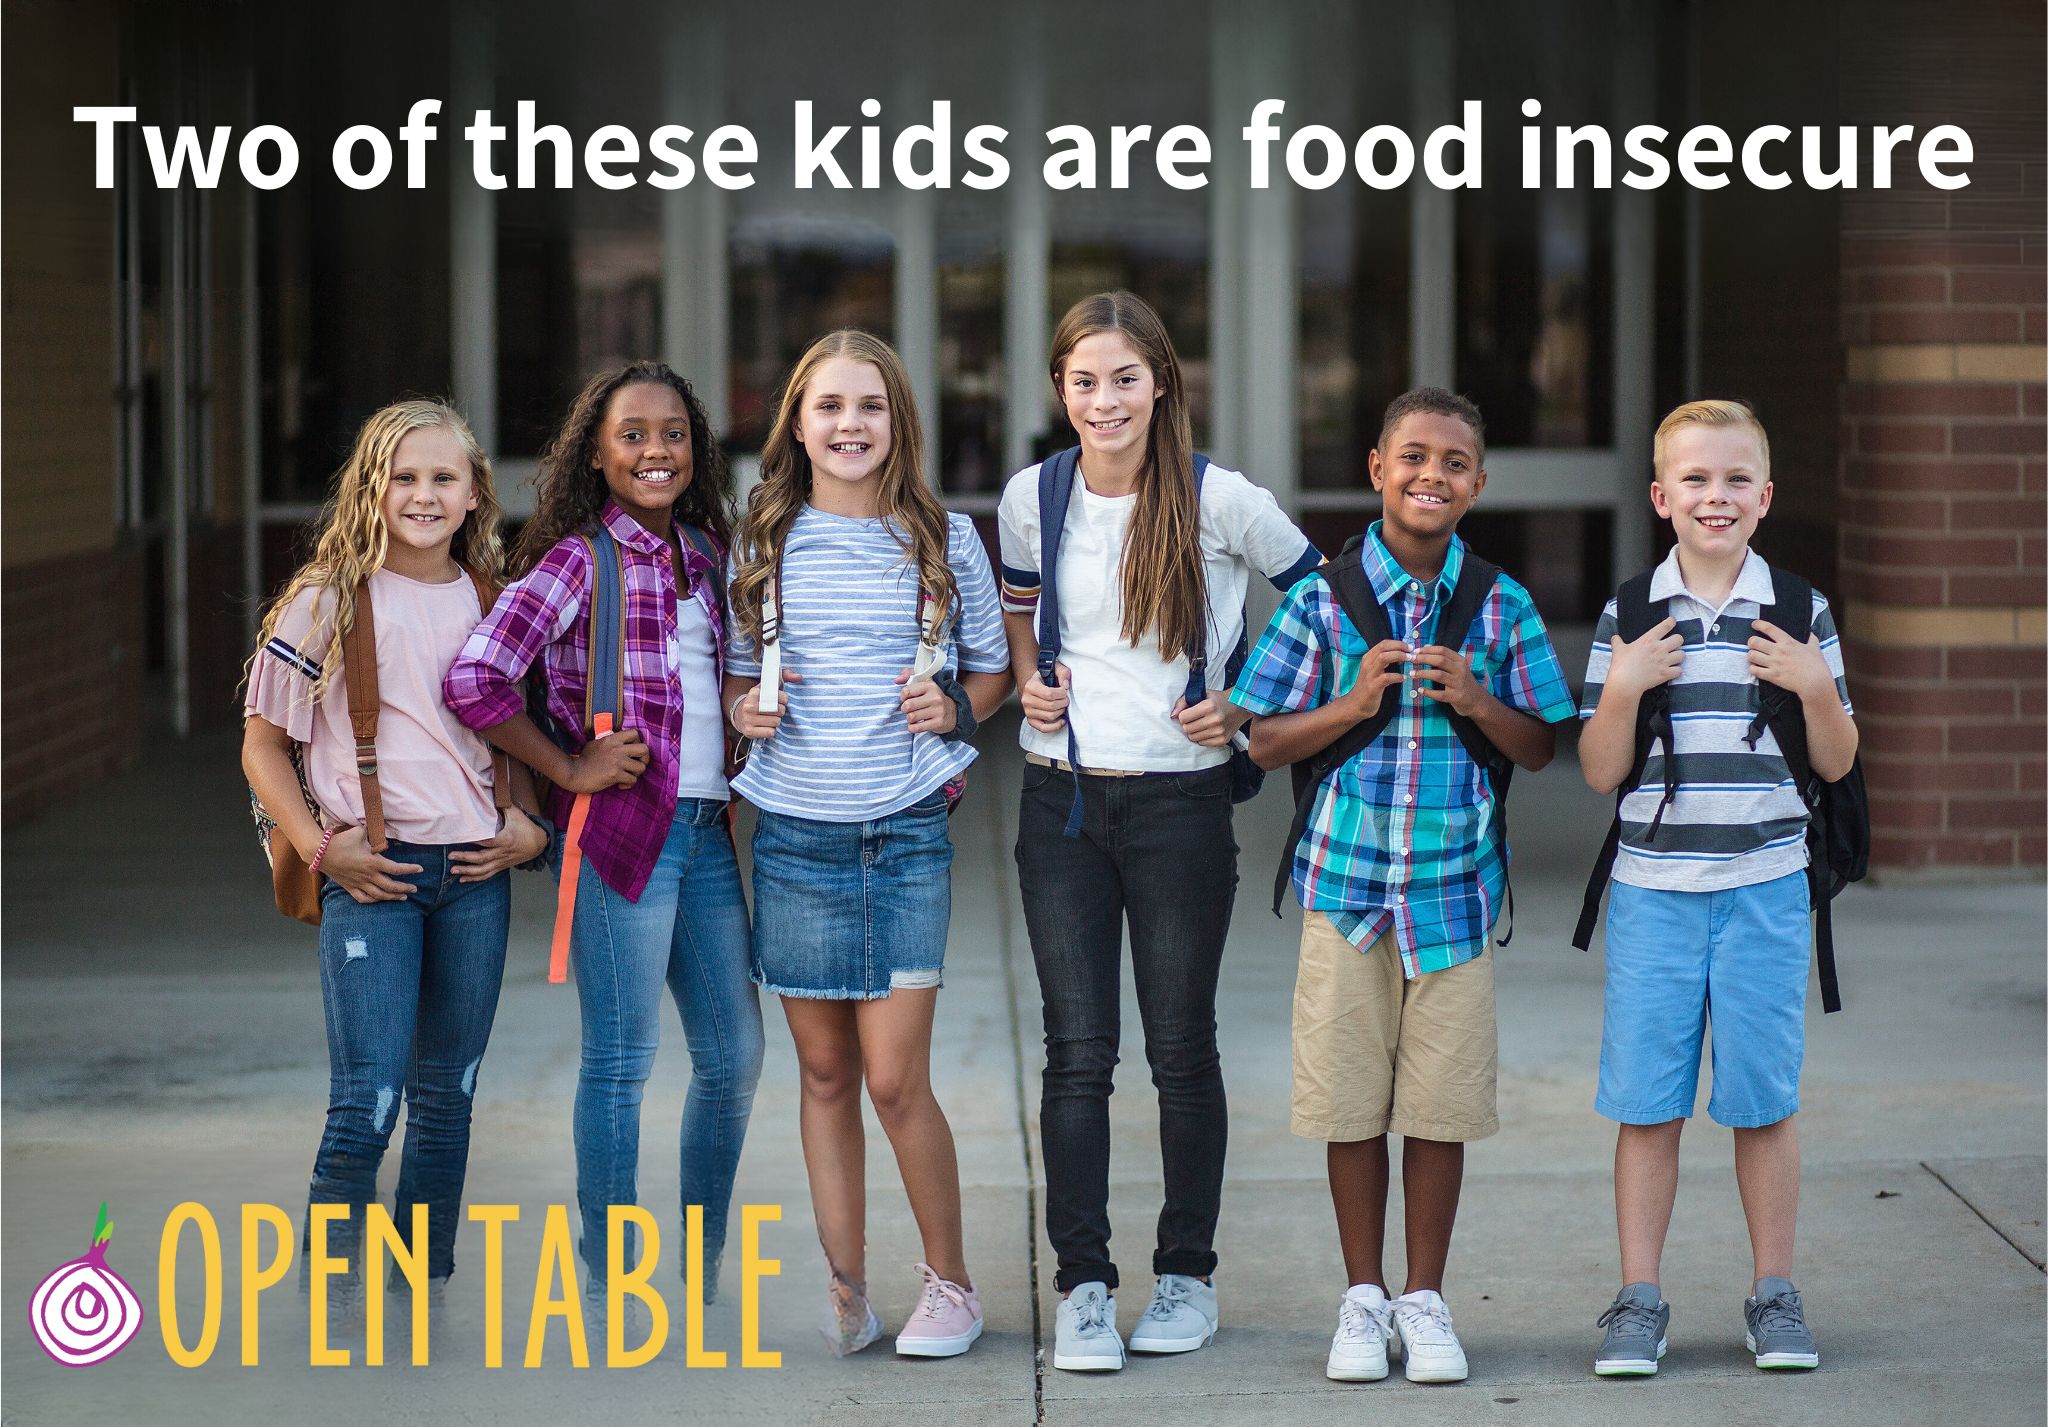 Two of these kids are food insecure